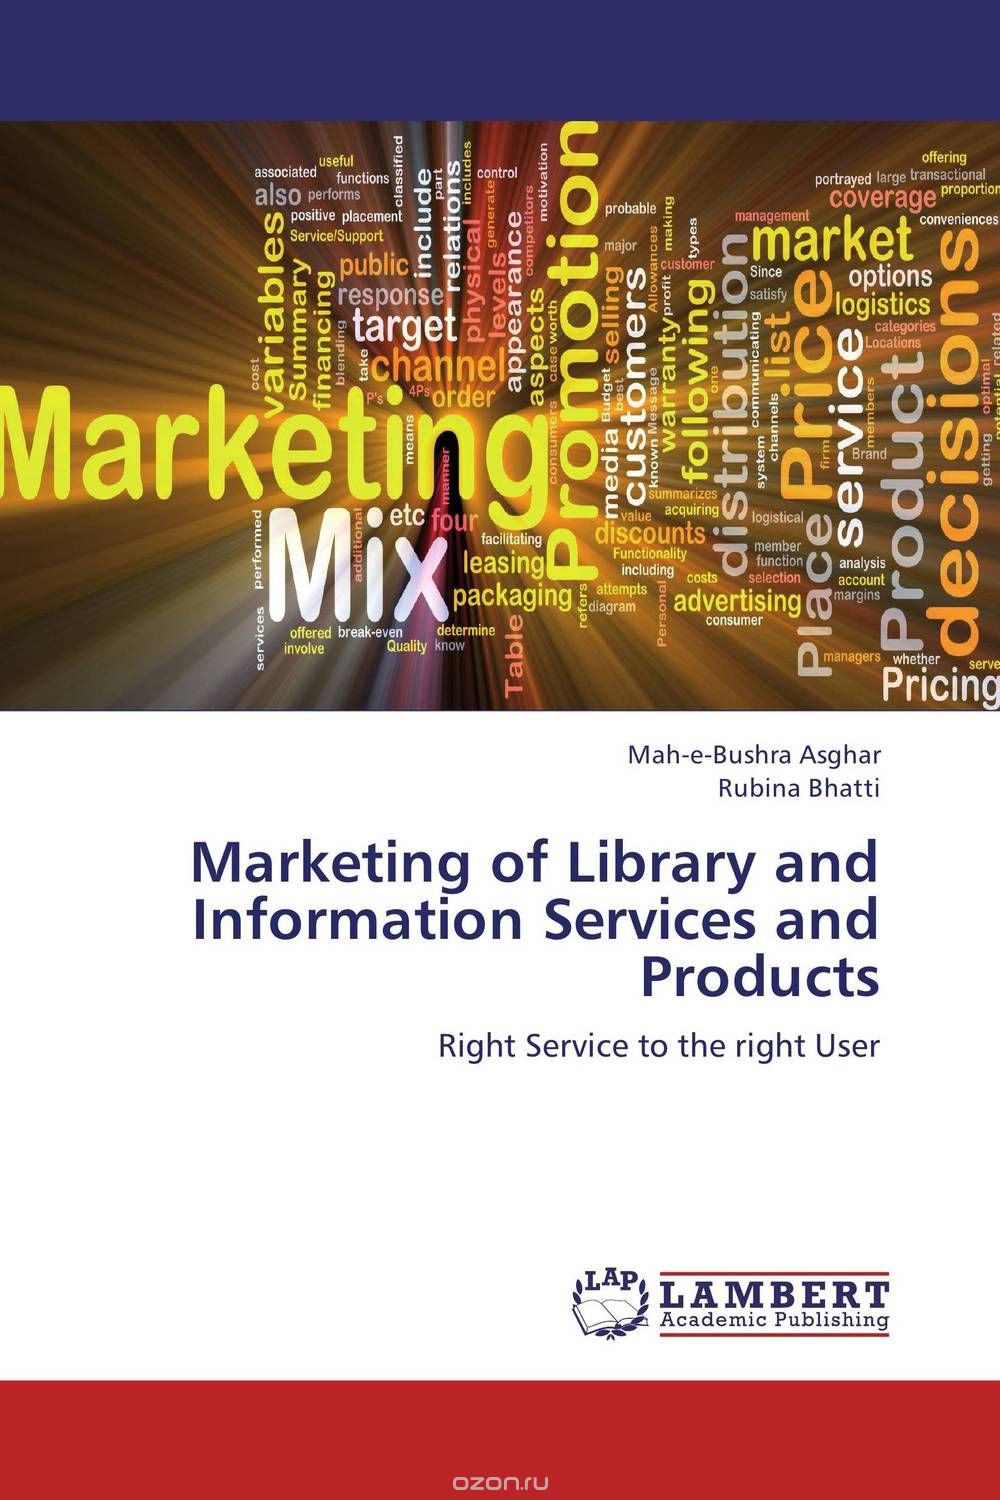 Скачать книгу "Marketing of Library and Information Services and Products"